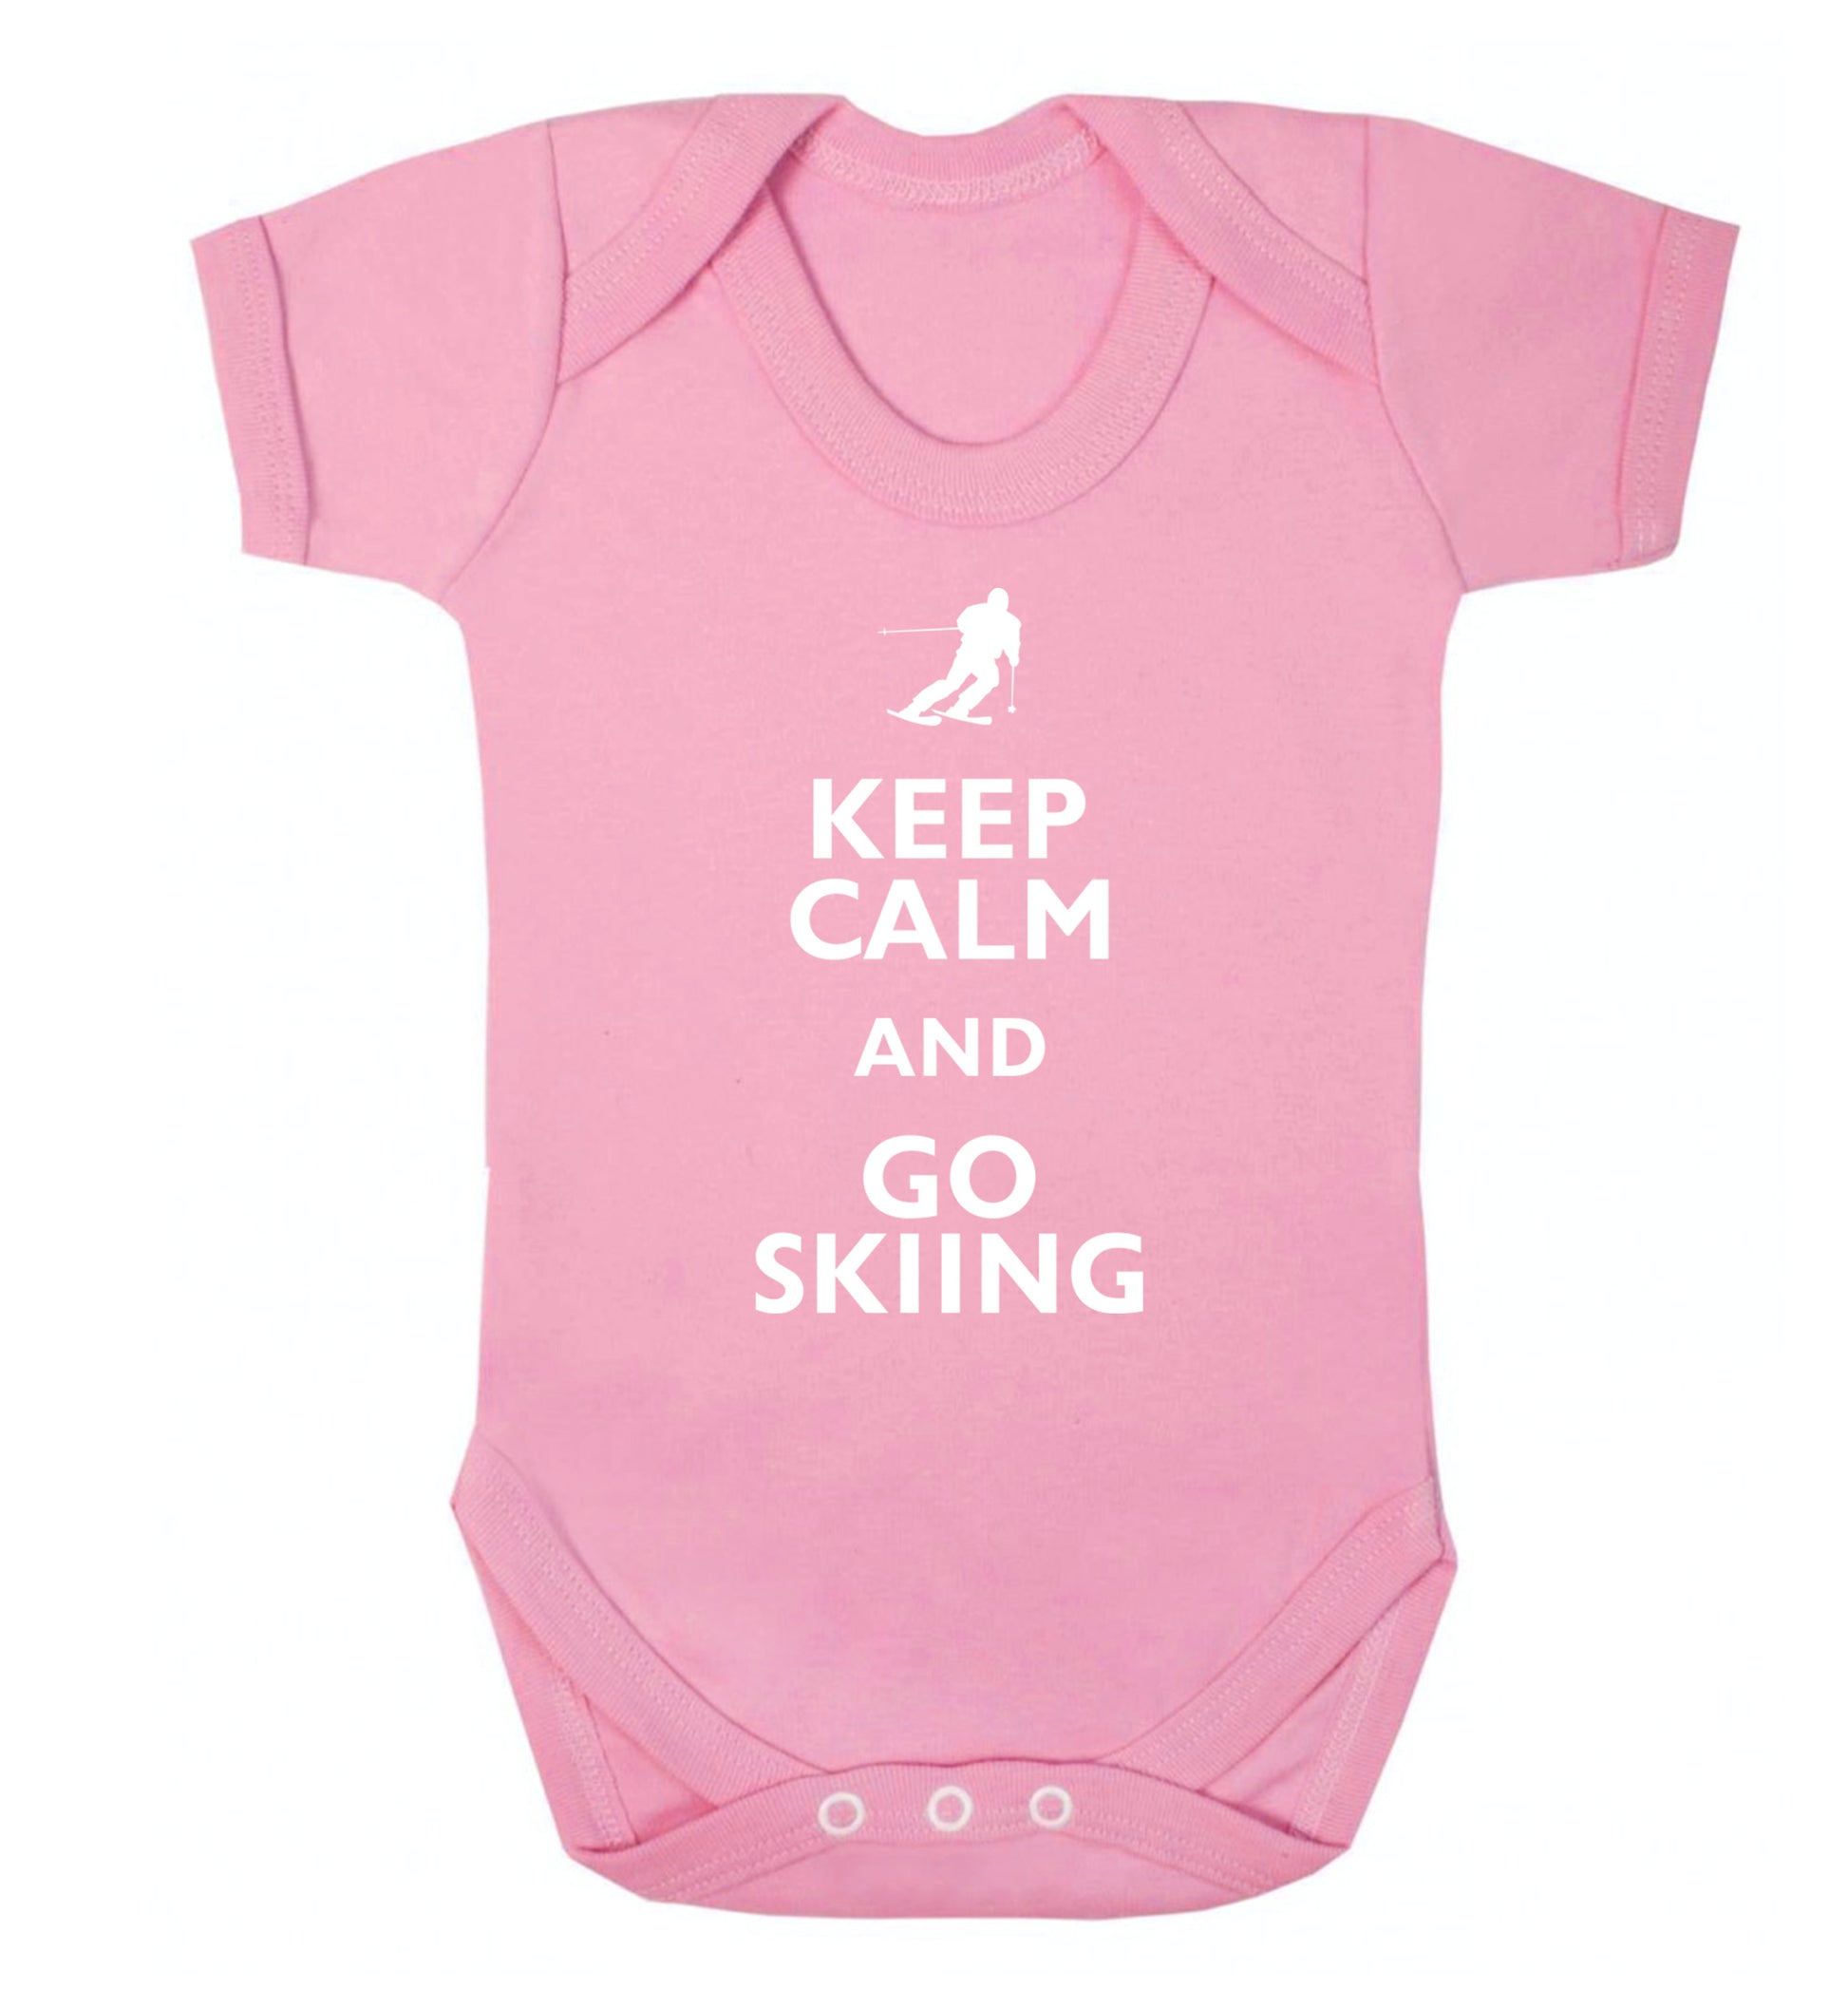 Keep calm and go skiing Baby Vest pale pink 18-24 months